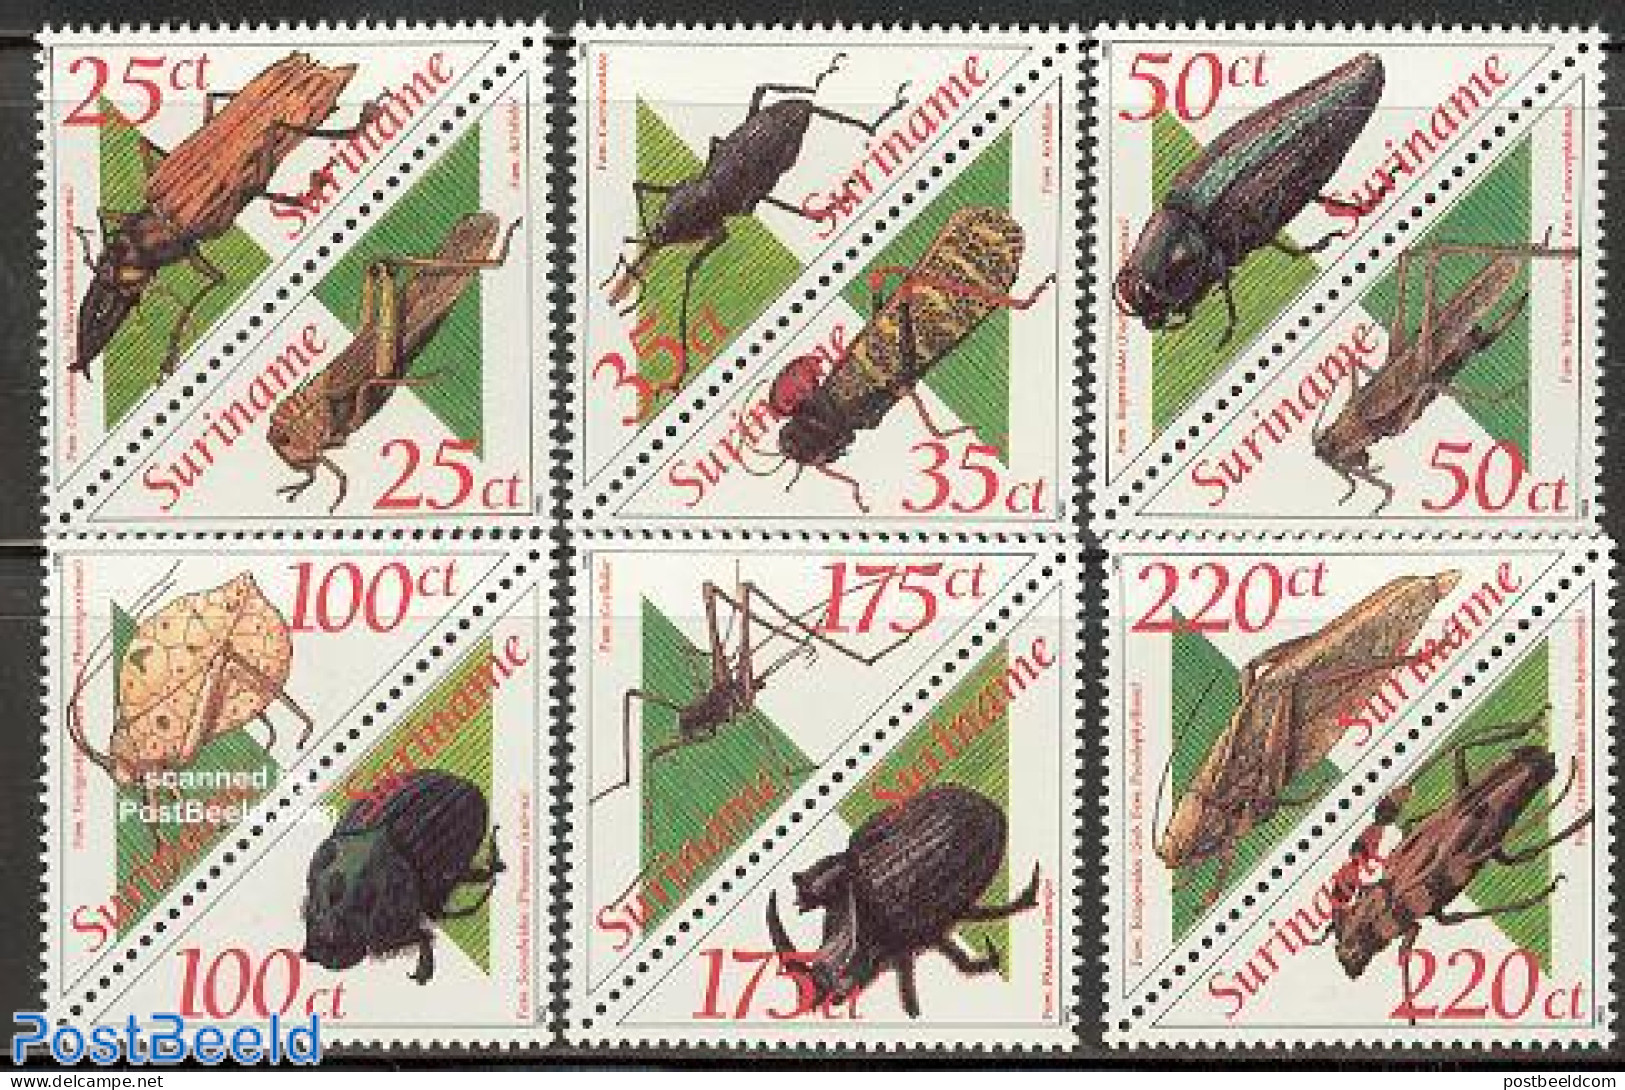 Suriname, Republic 1993 Insects 6x2v, Mint NH, Nature - Insects - Surinam